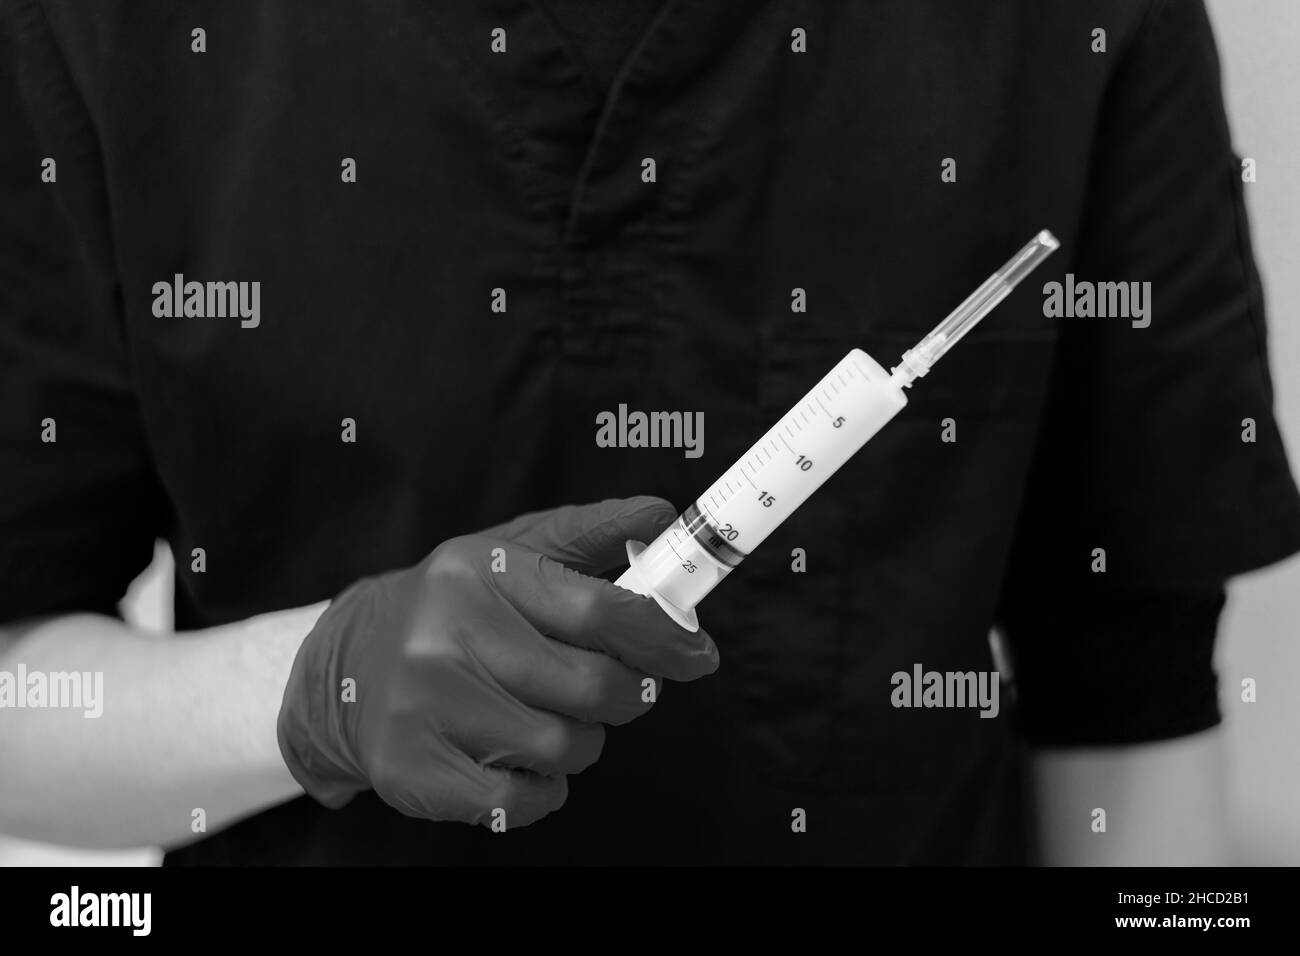 Large white syringe close-up in the hand of a doctor in a sterile glove. Selective focus. Black and white photo. Stock Photo